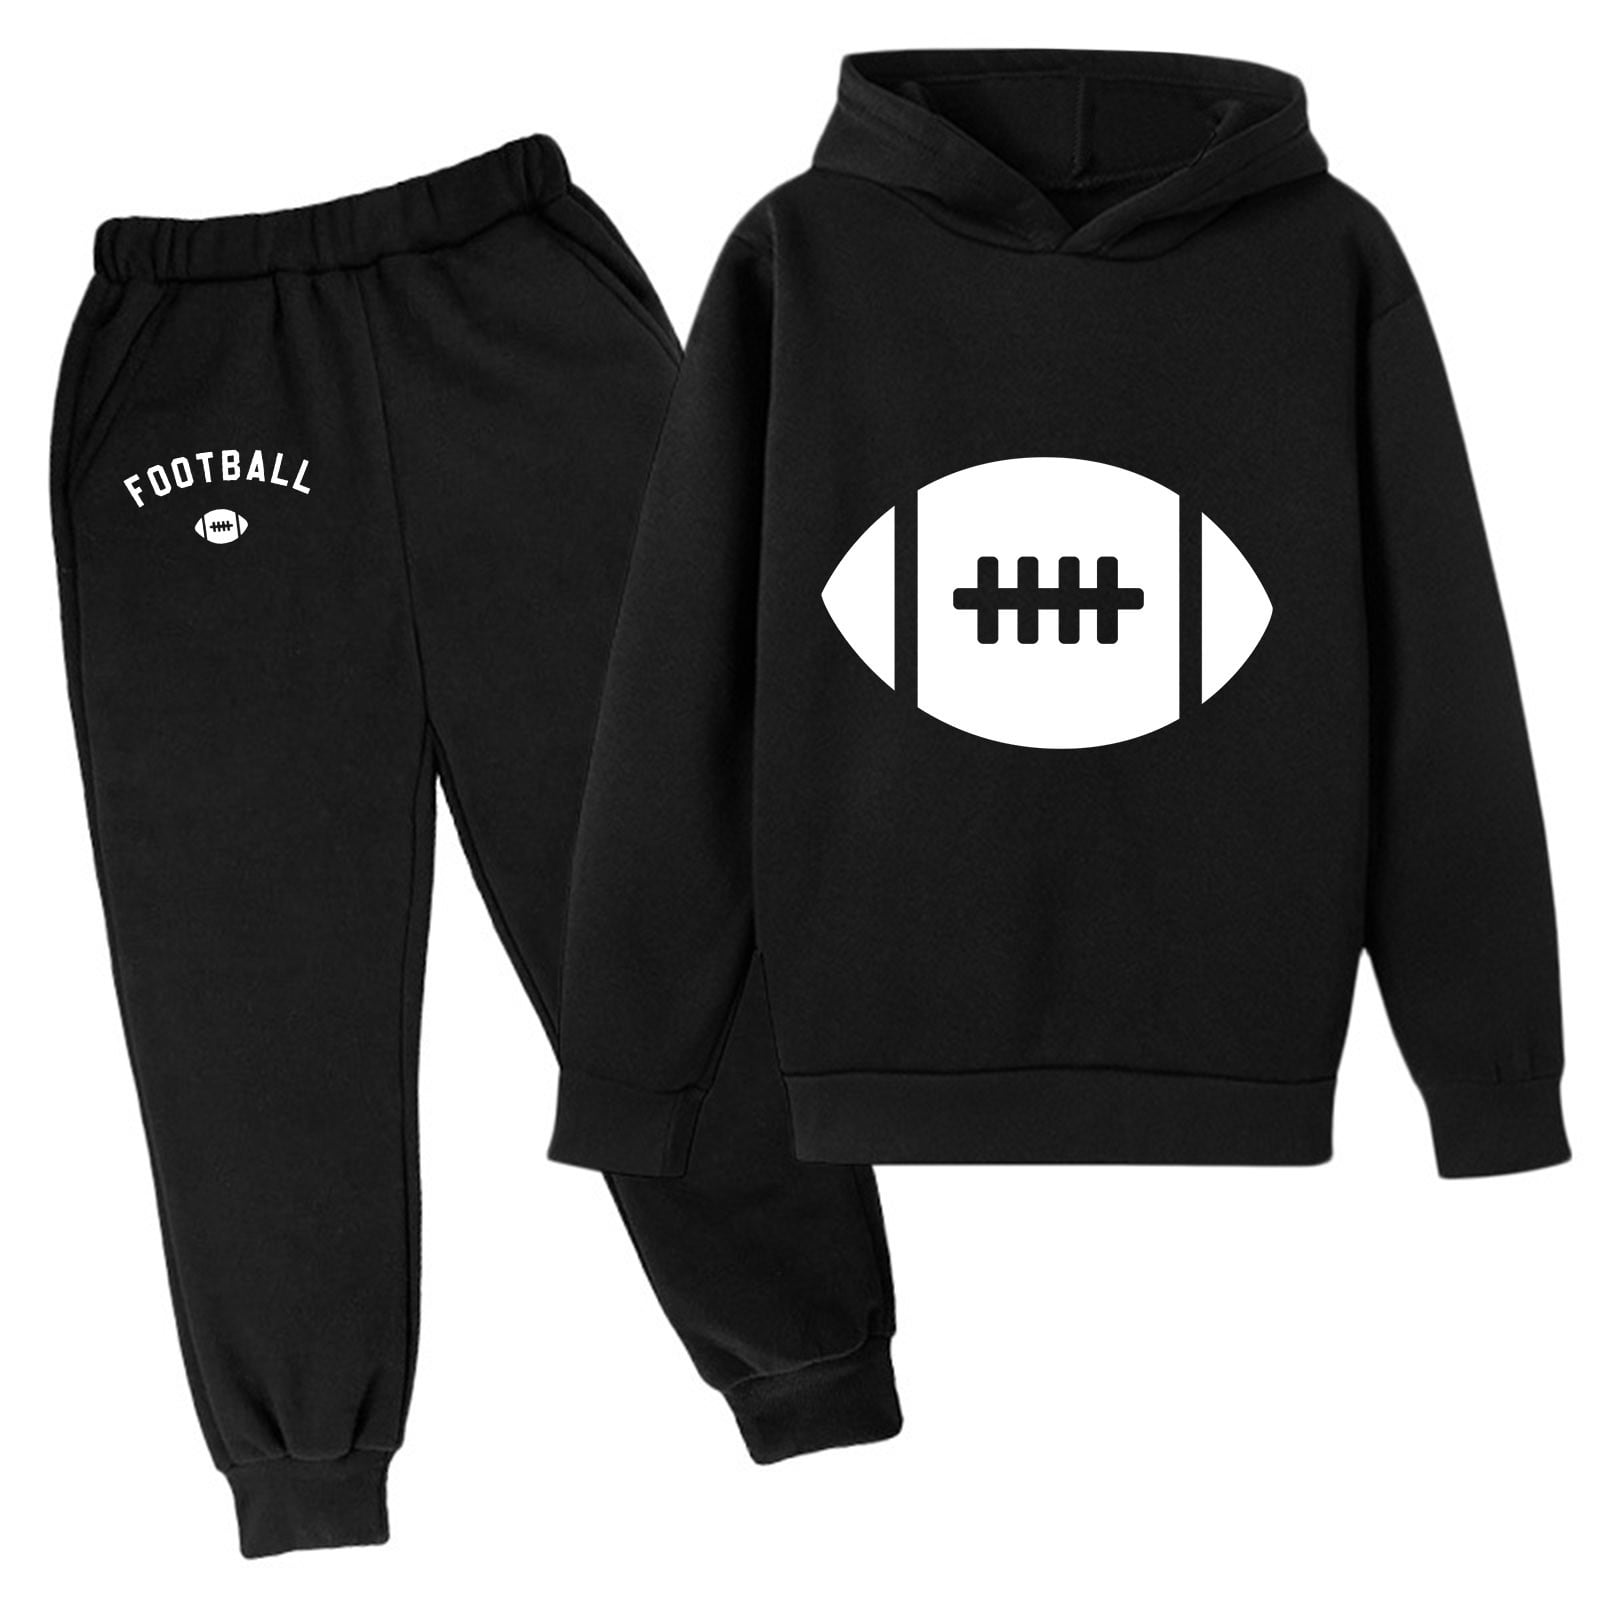 KDFJPTH Toddler Outfits Kids Hoodie Sweatshirt And Sweatpants Pullover ...